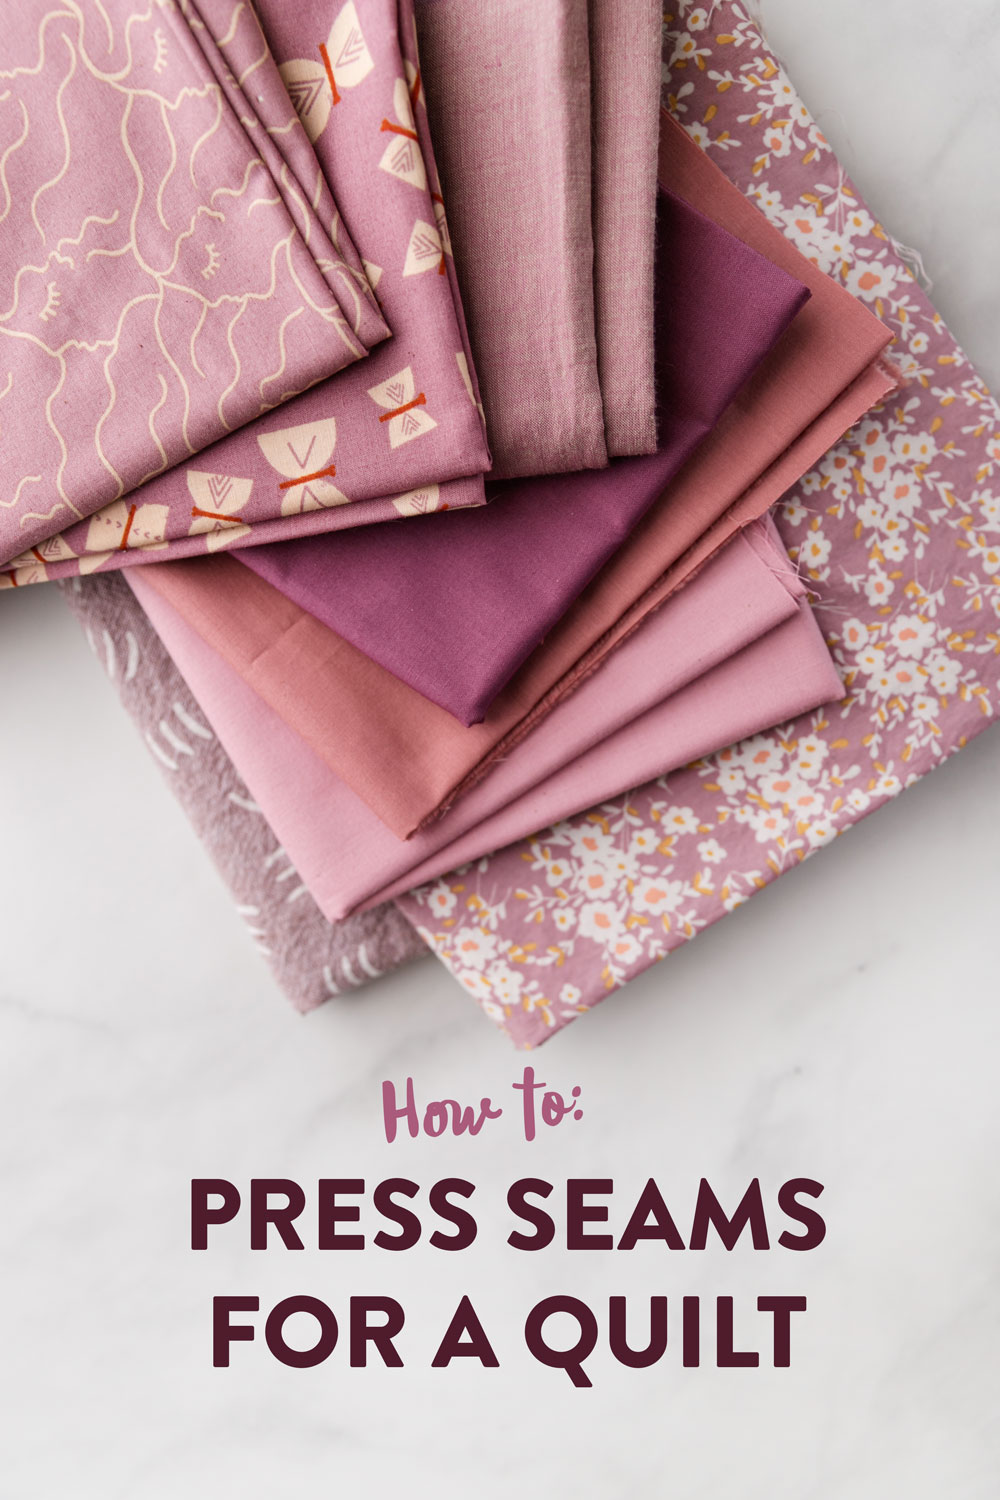 Learn how to press seams in a quilt. Included is a video tutorial and links to the best tools to use. suzyquilts.com #quilting